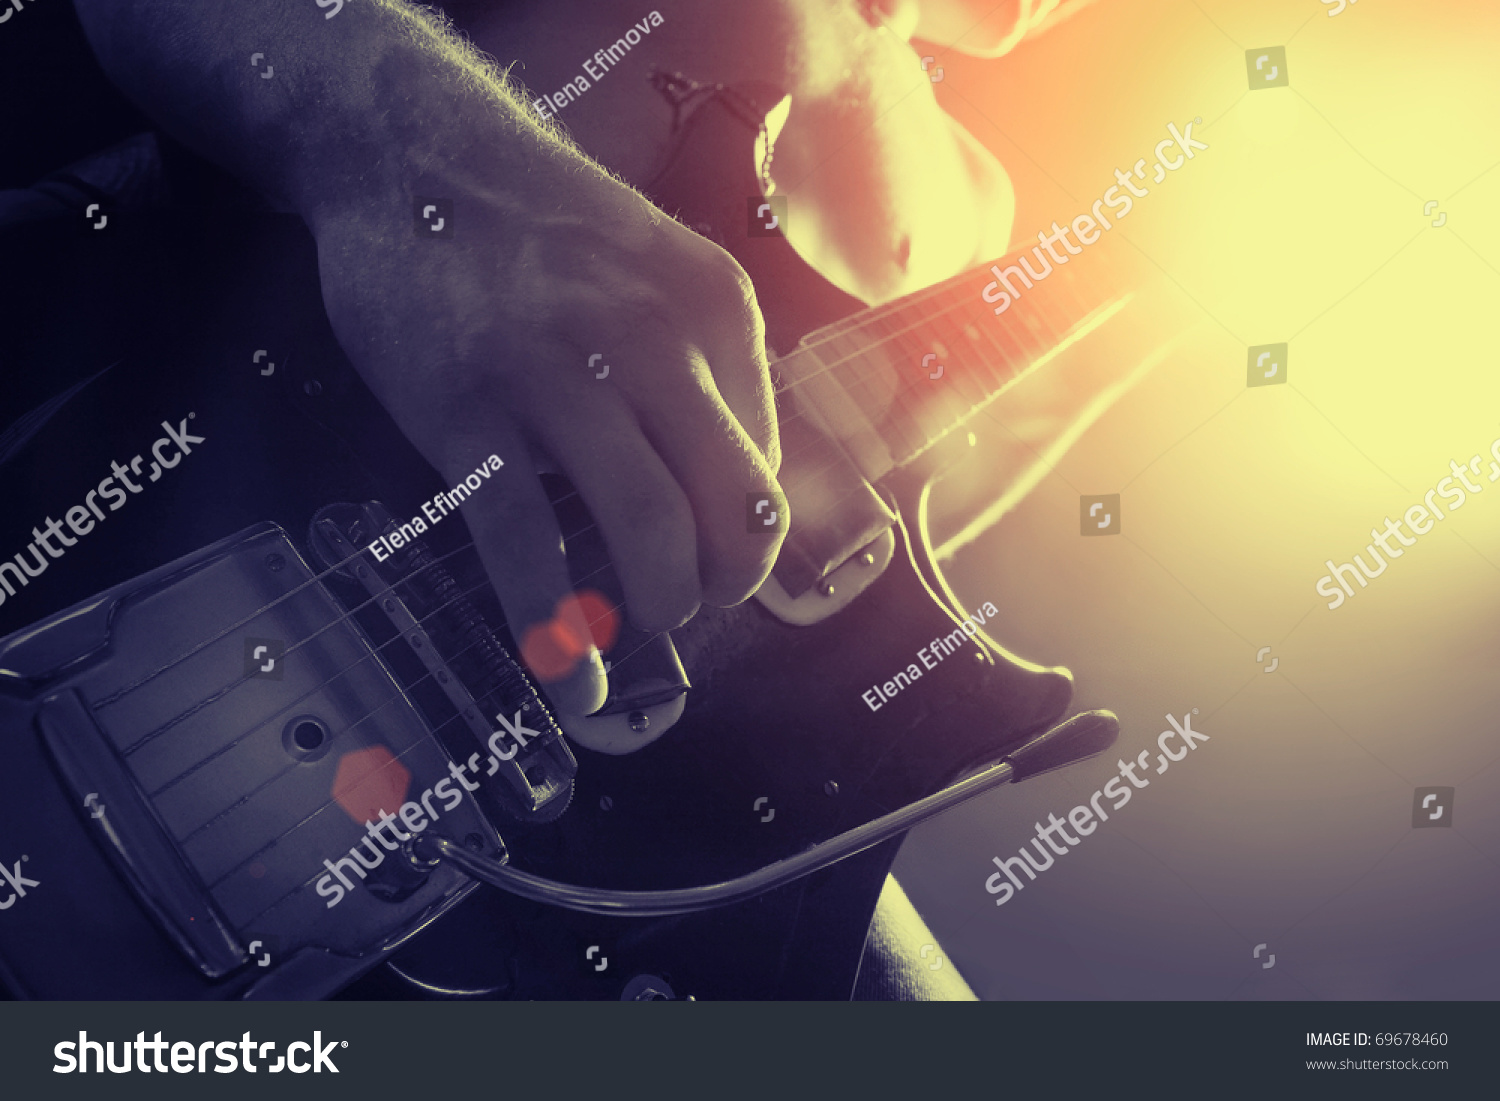 man playing electrical guitar in black and yellow #69678460